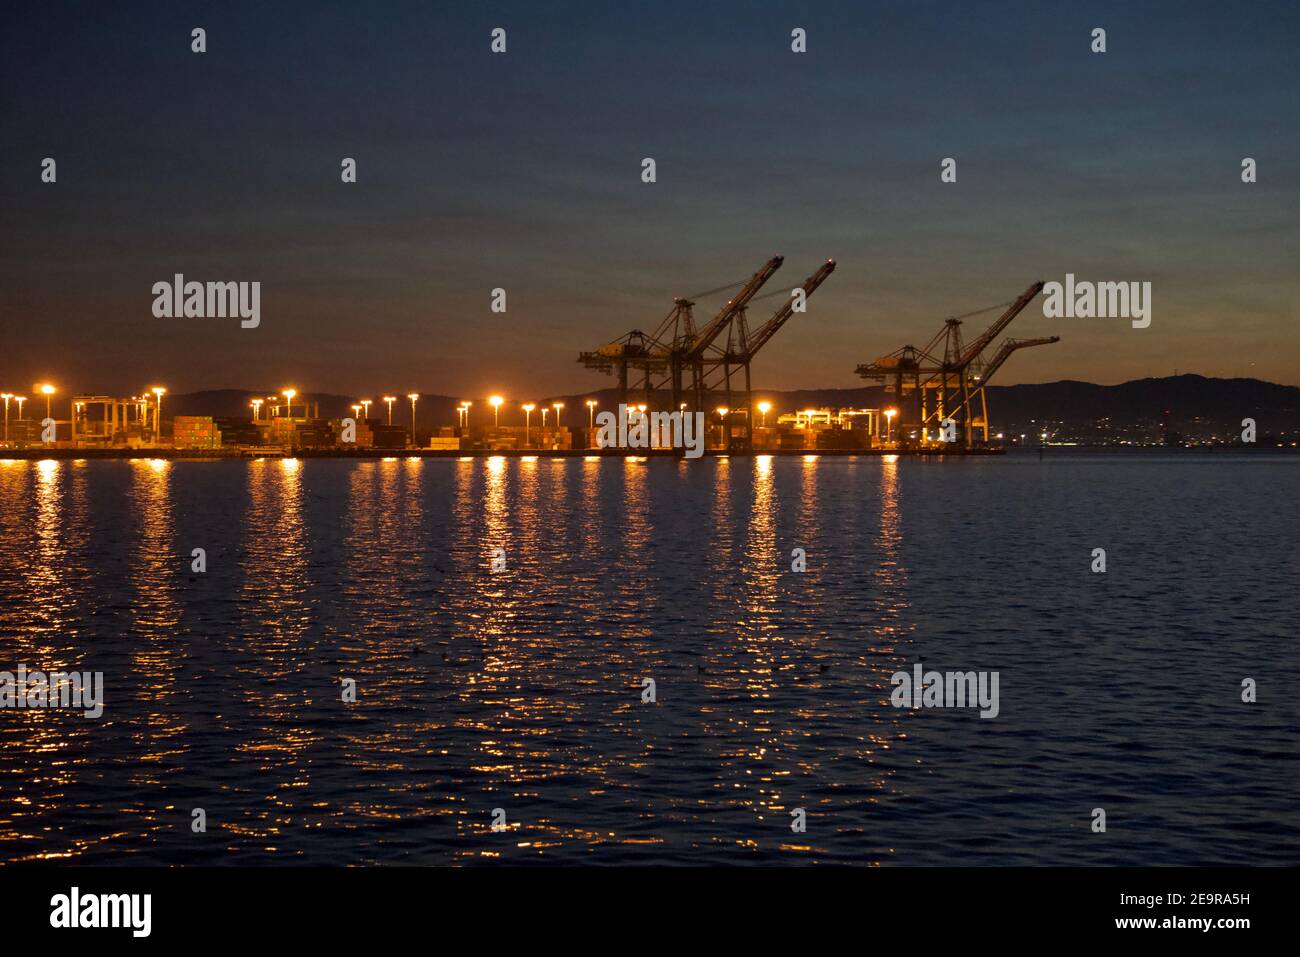 Port of Oakland at sunset. Intermodal shipping containers and cranes in the San Francisco Bay. International trade and commerce. Stock Photo